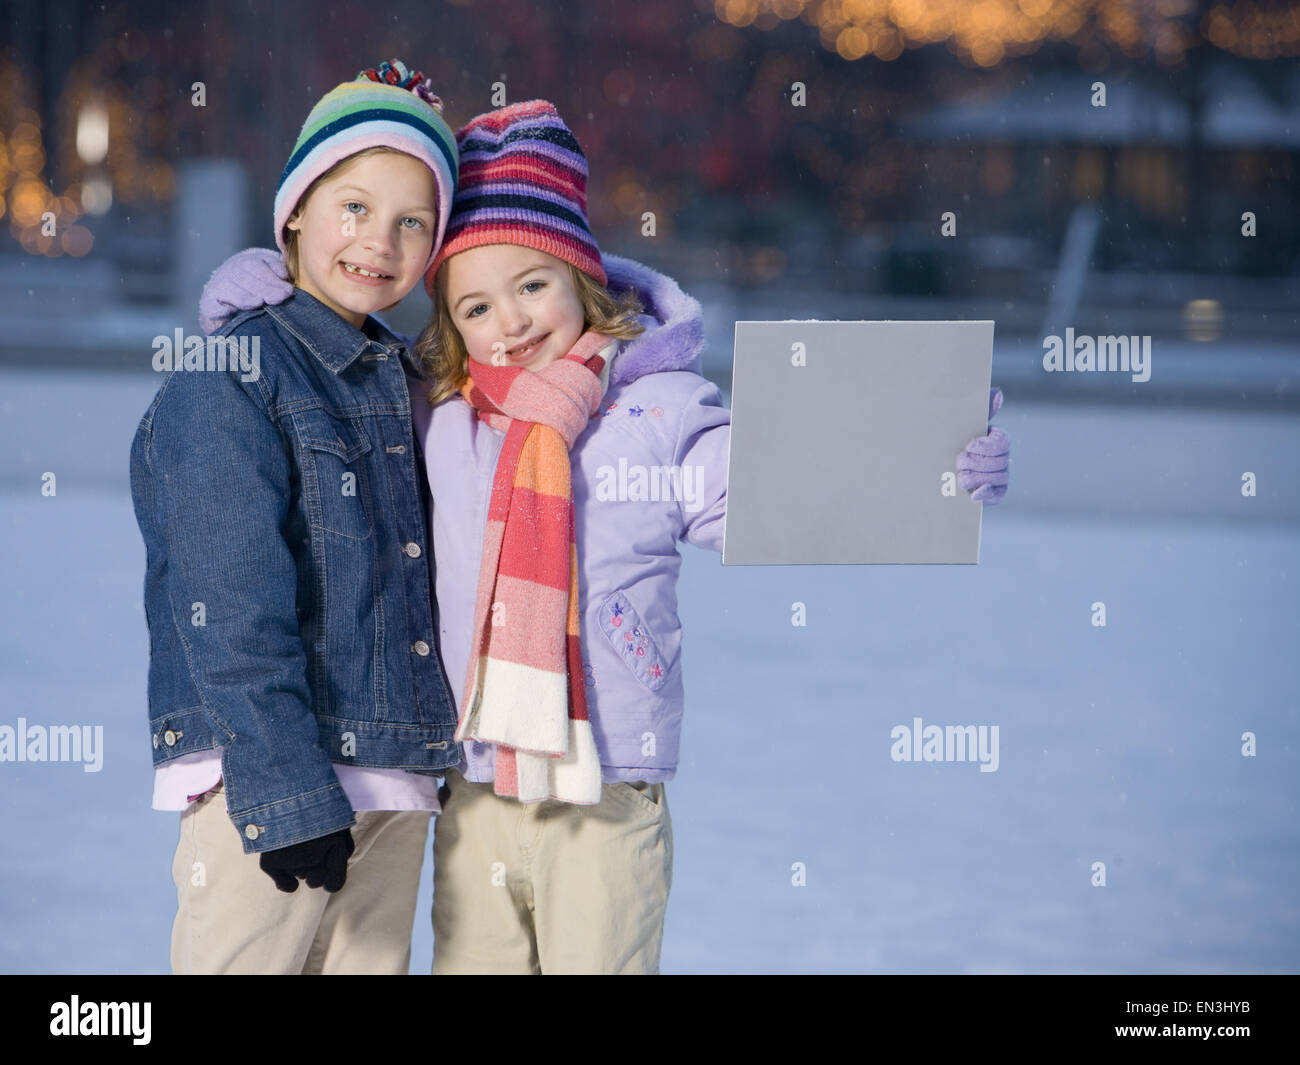 Two girls outdoors in winter with blank sign Stock Photo